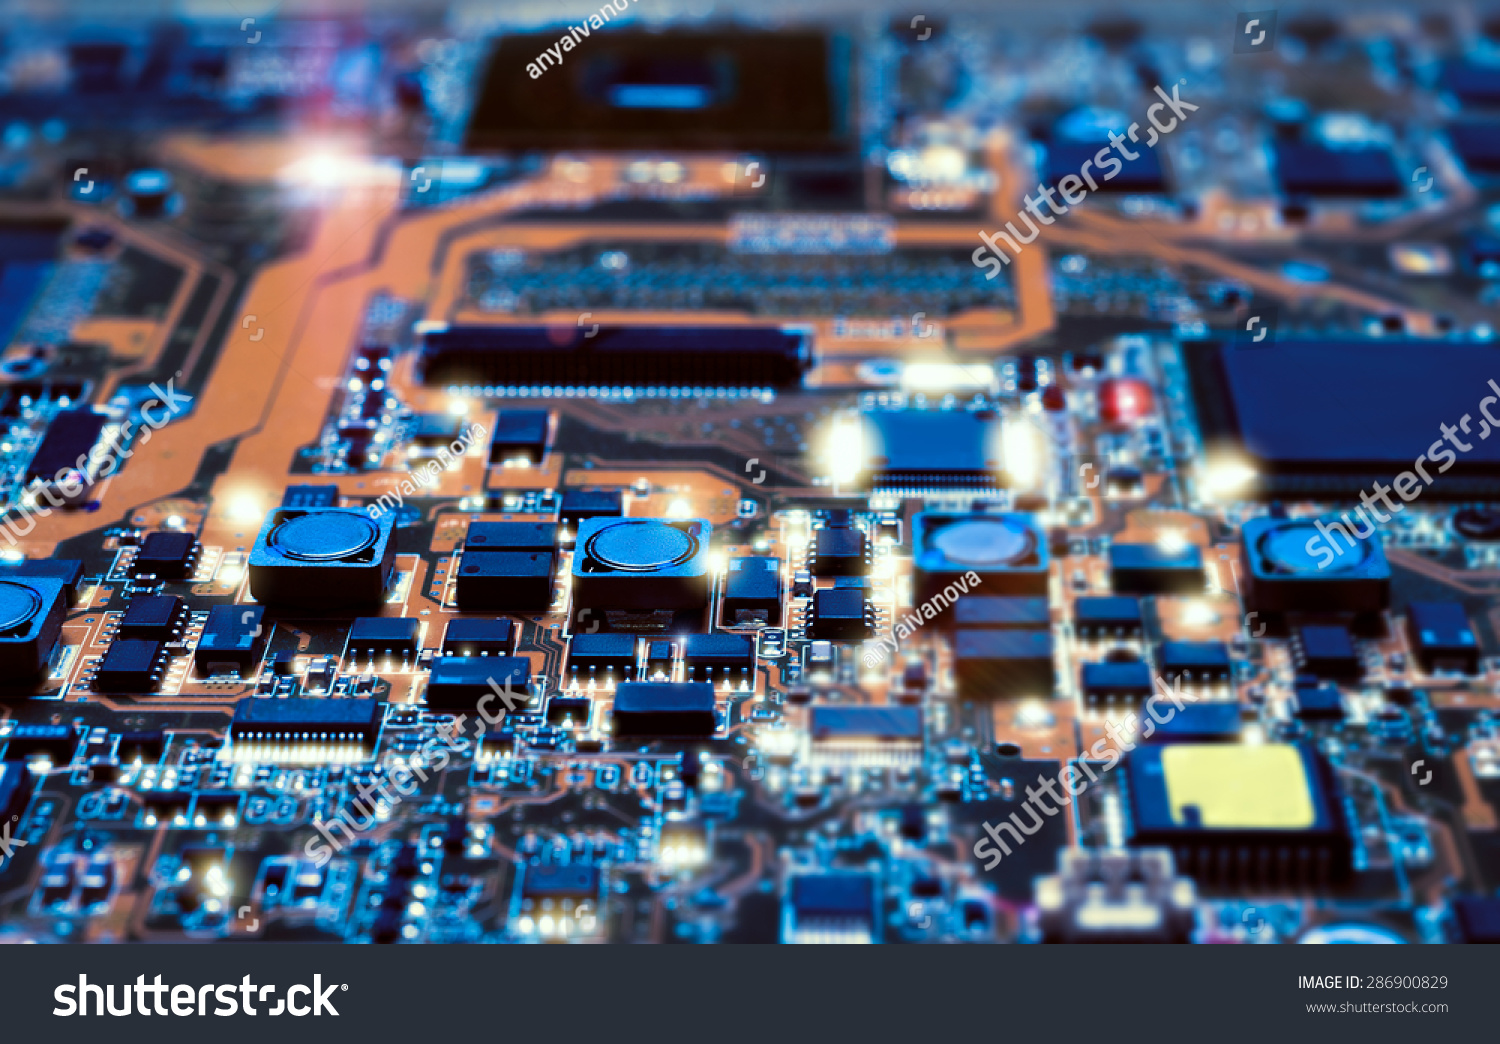 Closeup on electronic board in hardware repair shop, blurred and toned image. Shallow DOF, focus on the middle left field #286900829